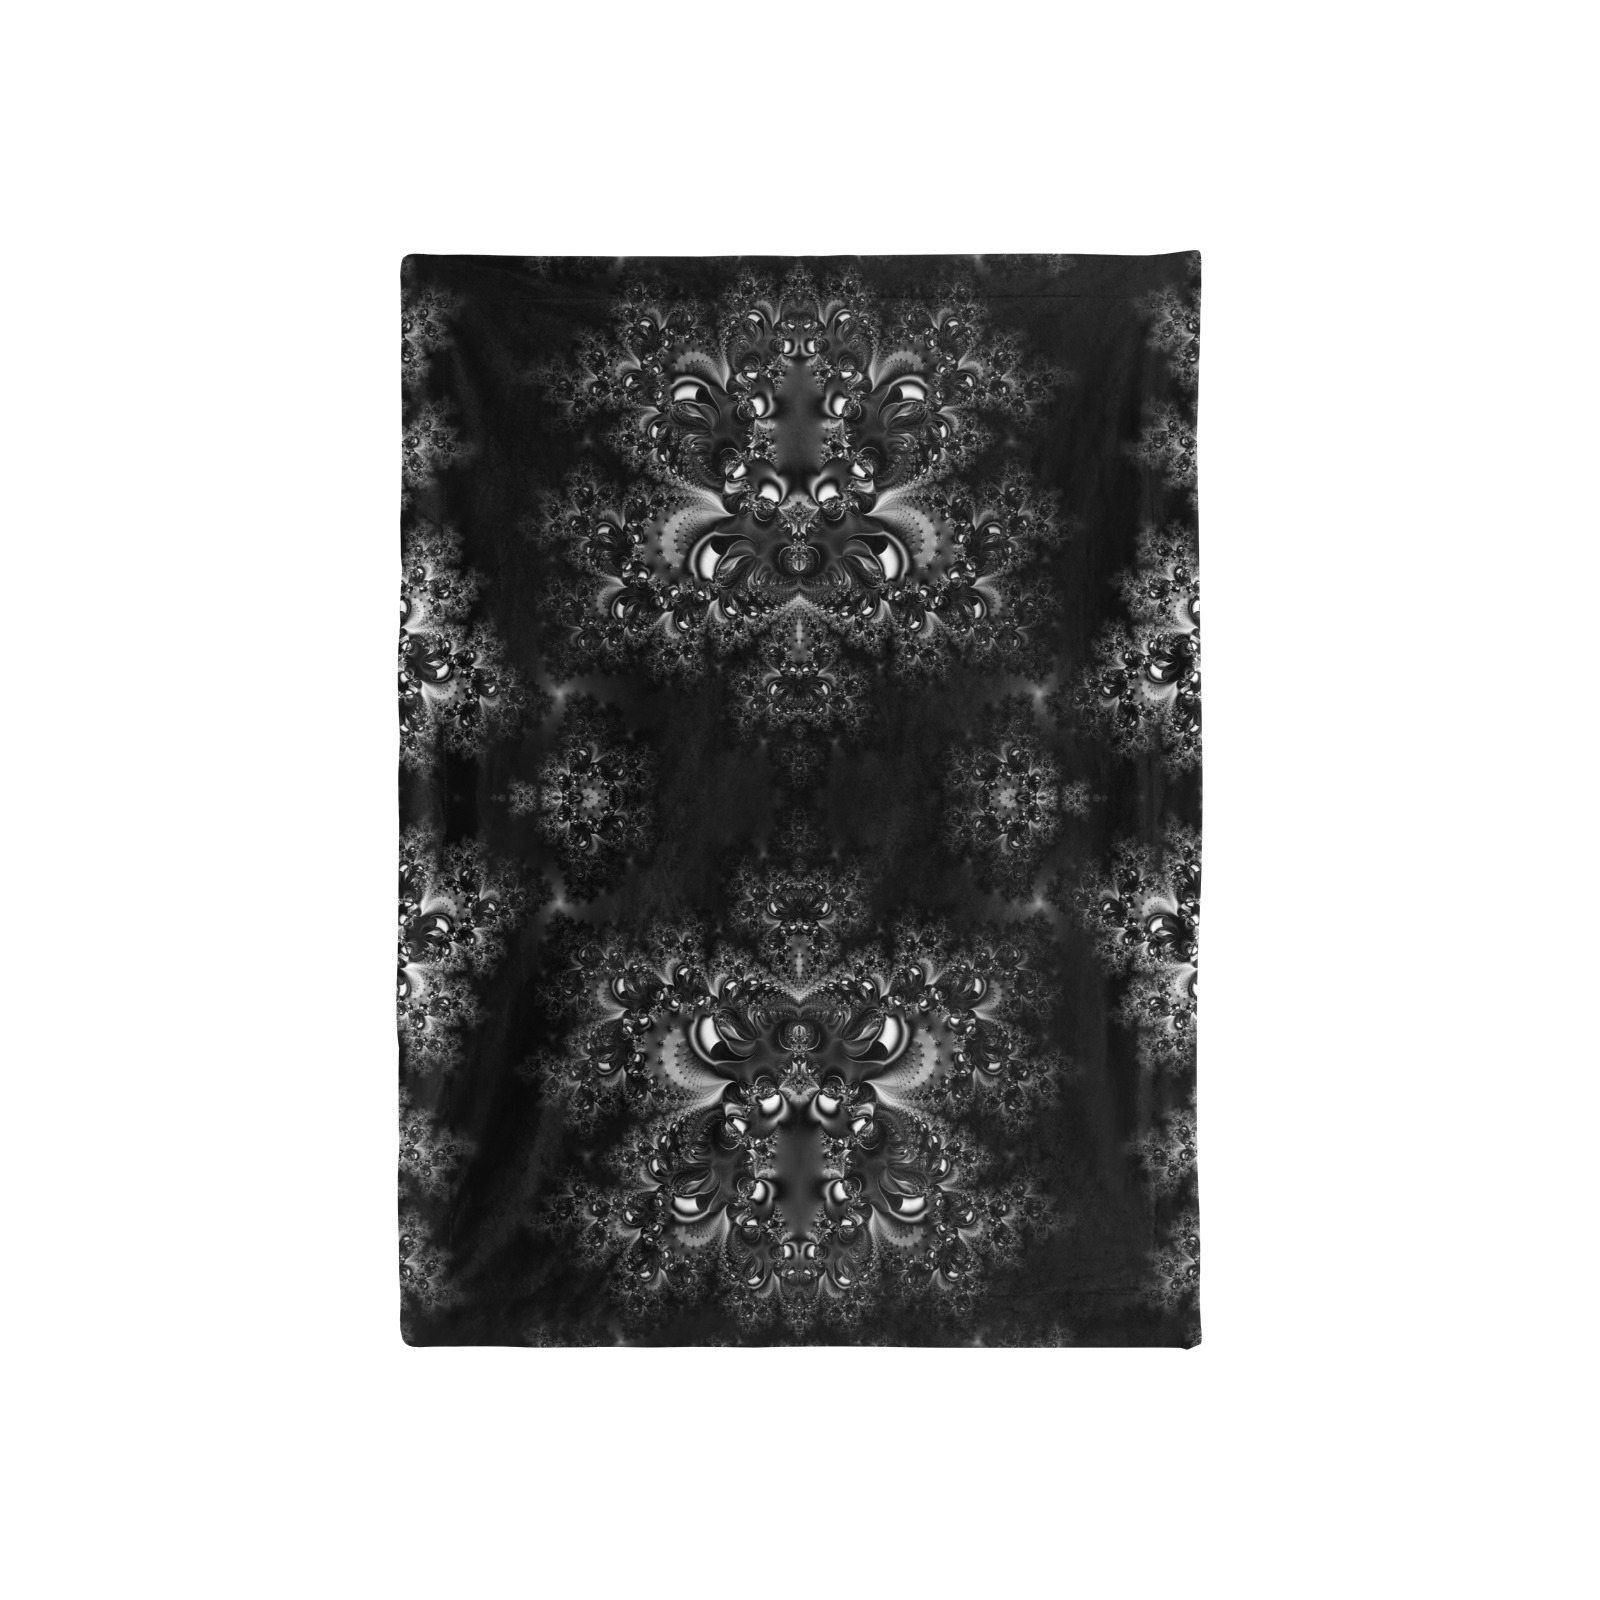 Frost at Midnight Fractal Baby Blanket 40"x50"